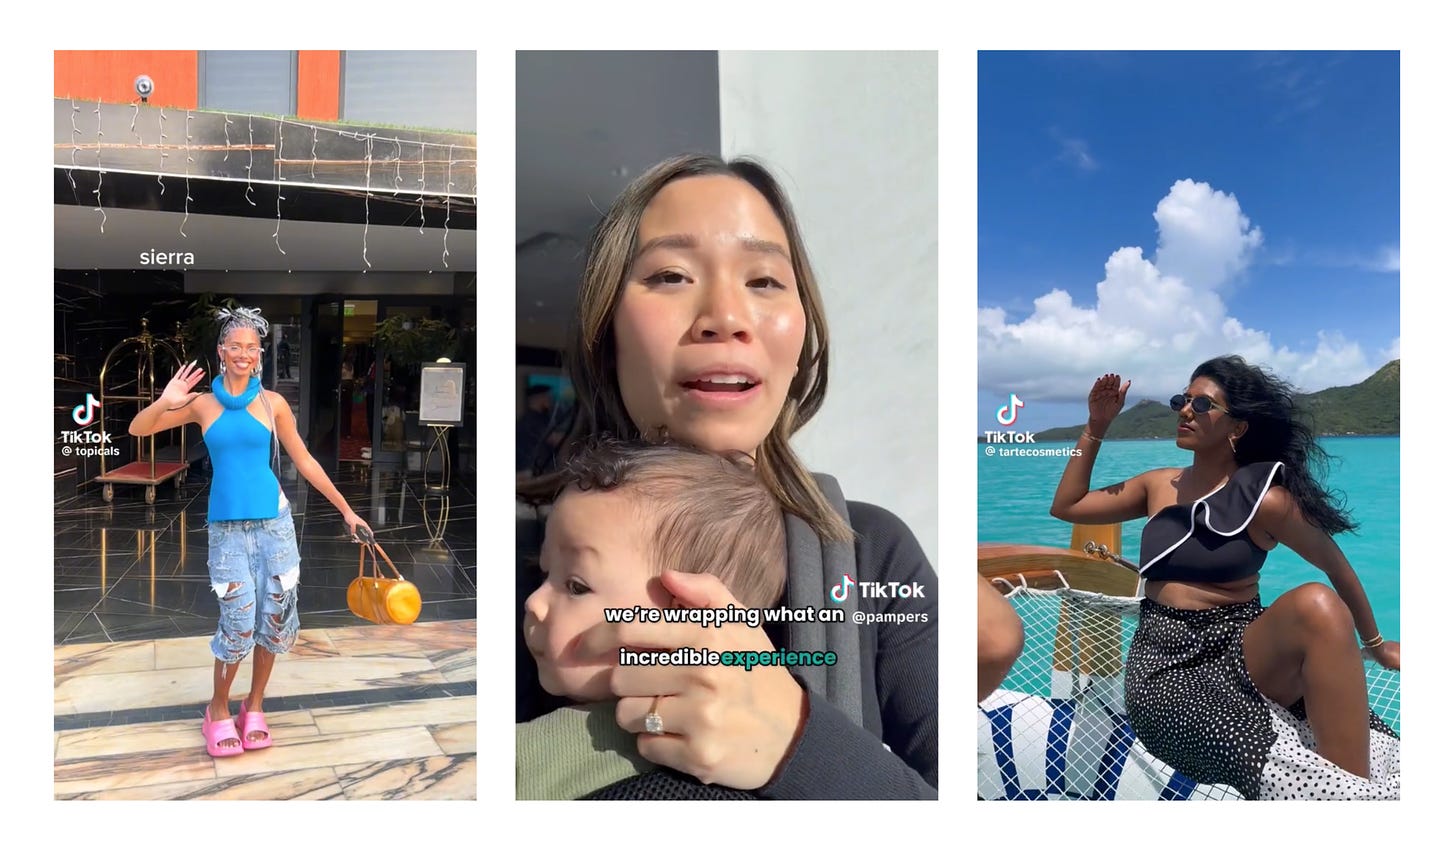 Screenshots of 3 brand influencer trips, one from Topicals in Ghana, one from Pampers in Ohio and one from Tarte in Bora Bora